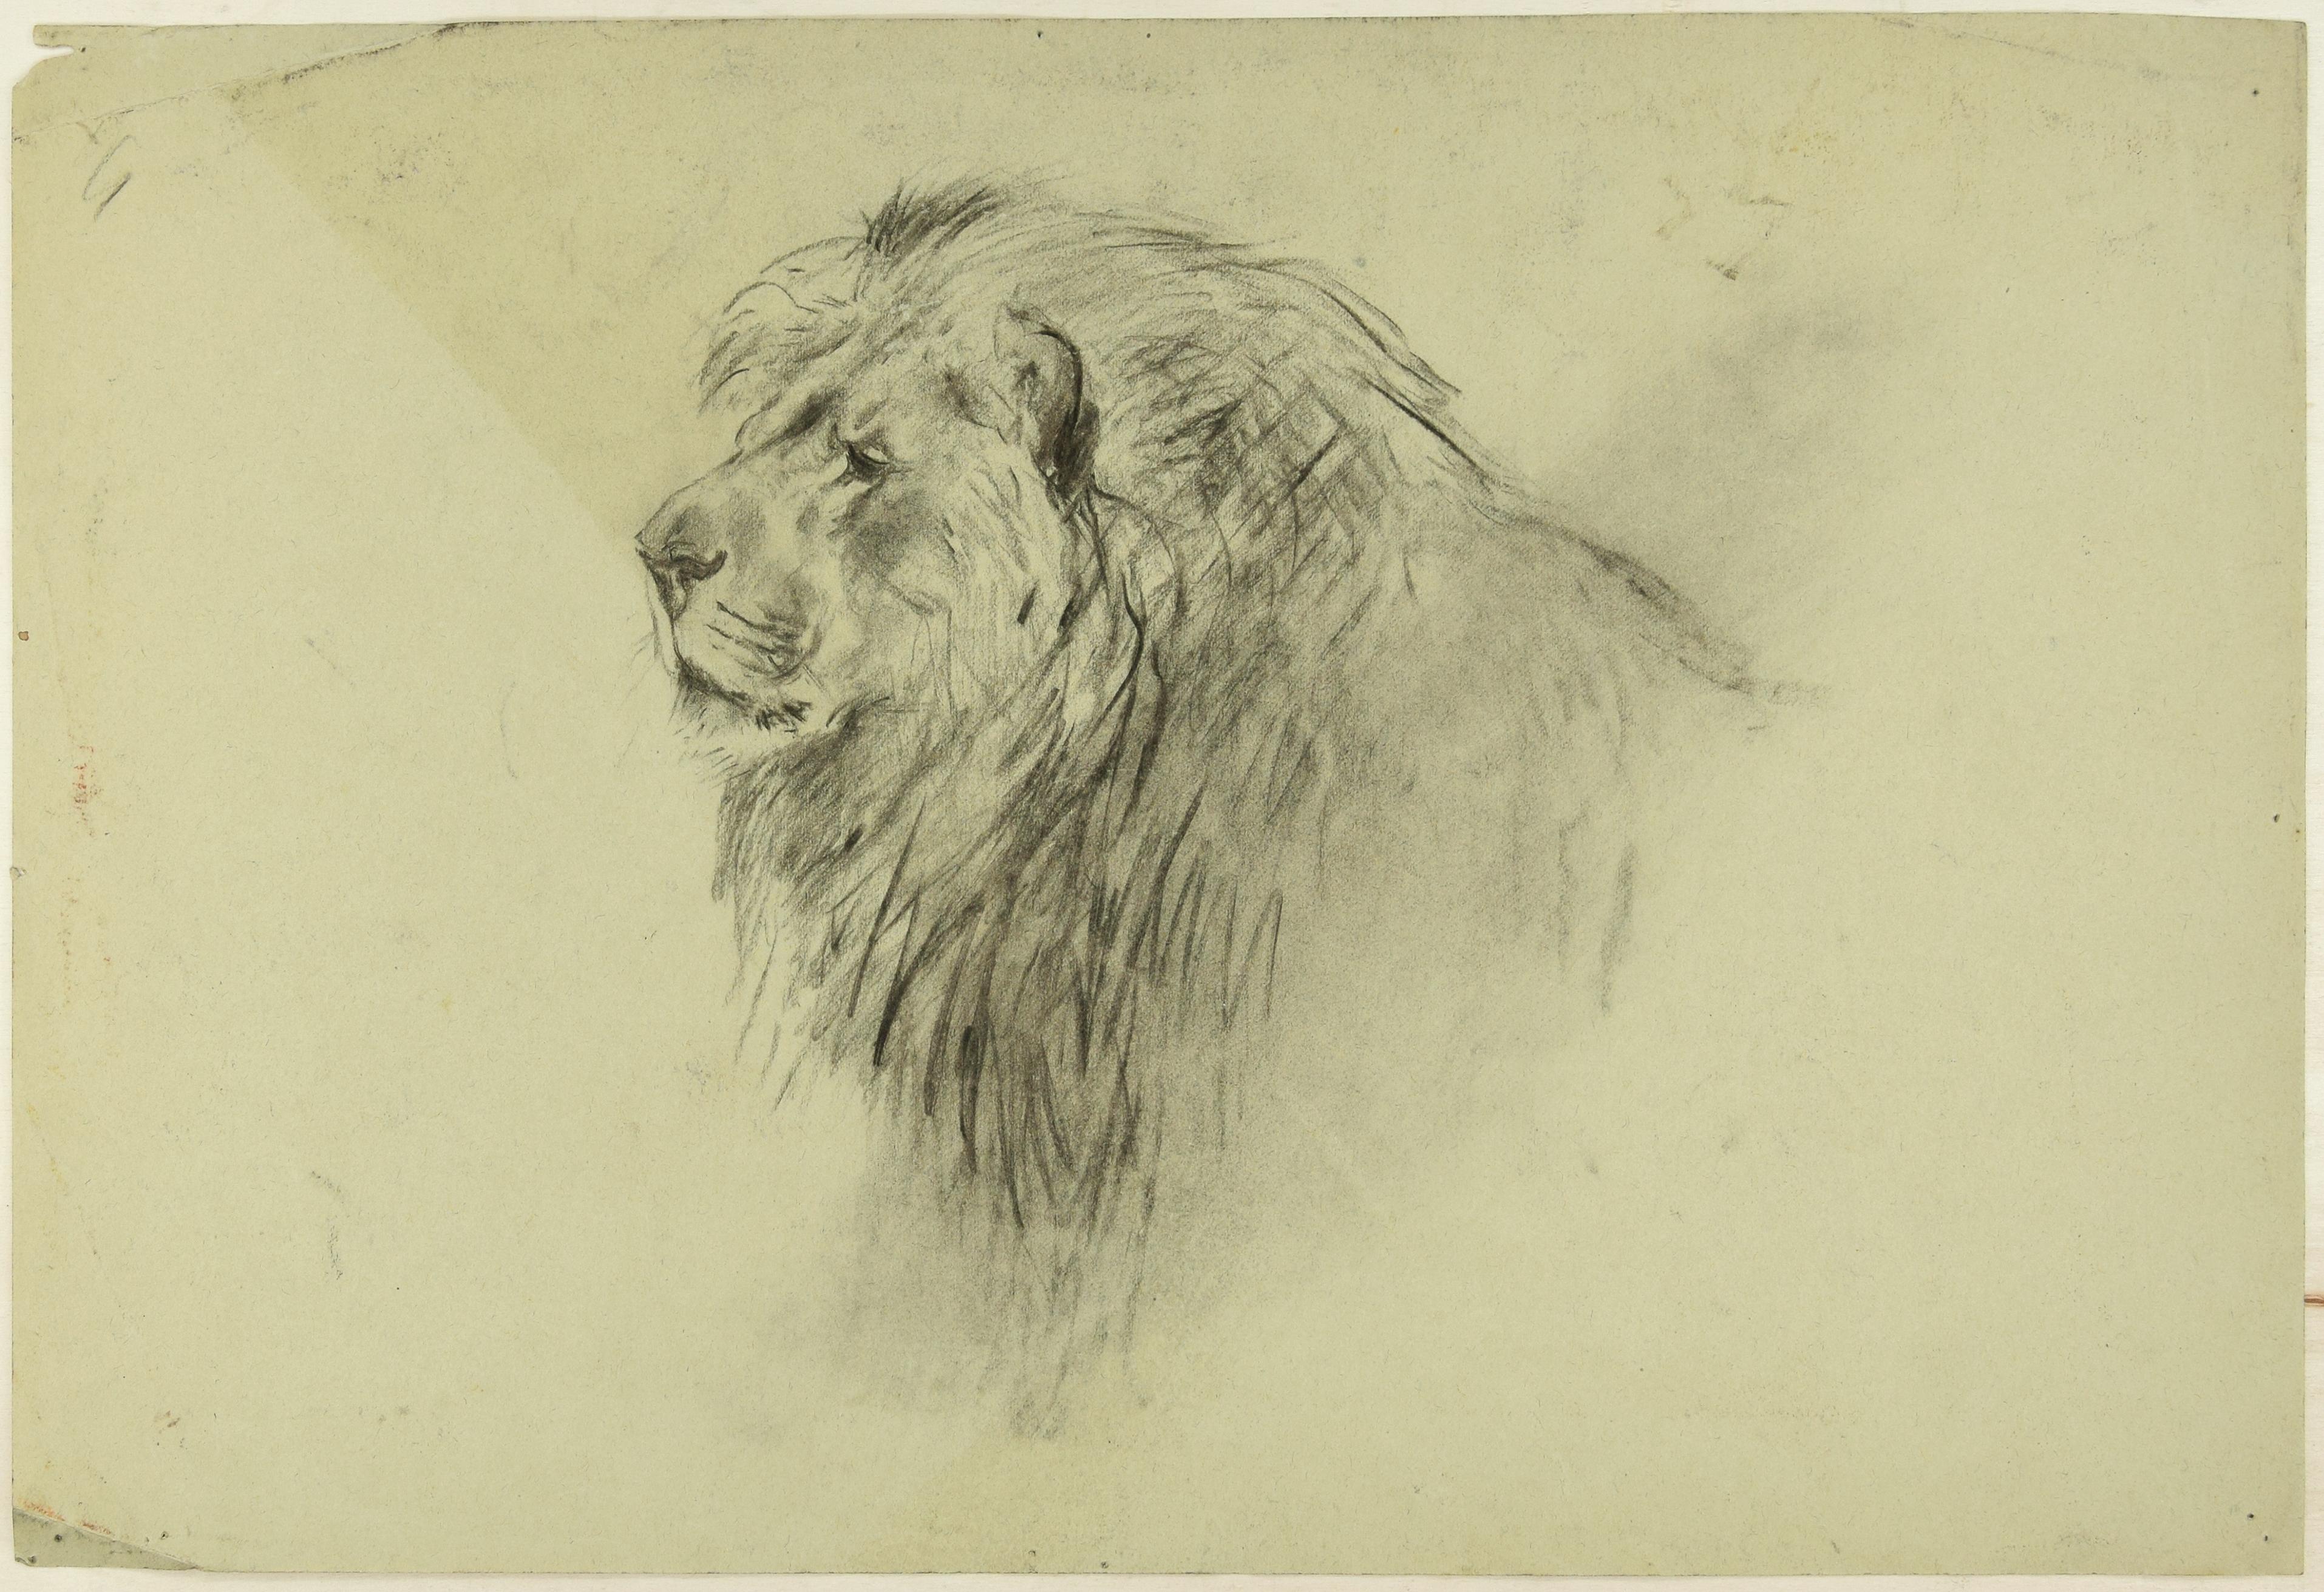 Wilhelm Lorenz Figurative Art - Lion and Deers - Original Charcoal Drawing by Willy Lorenz - 1940s